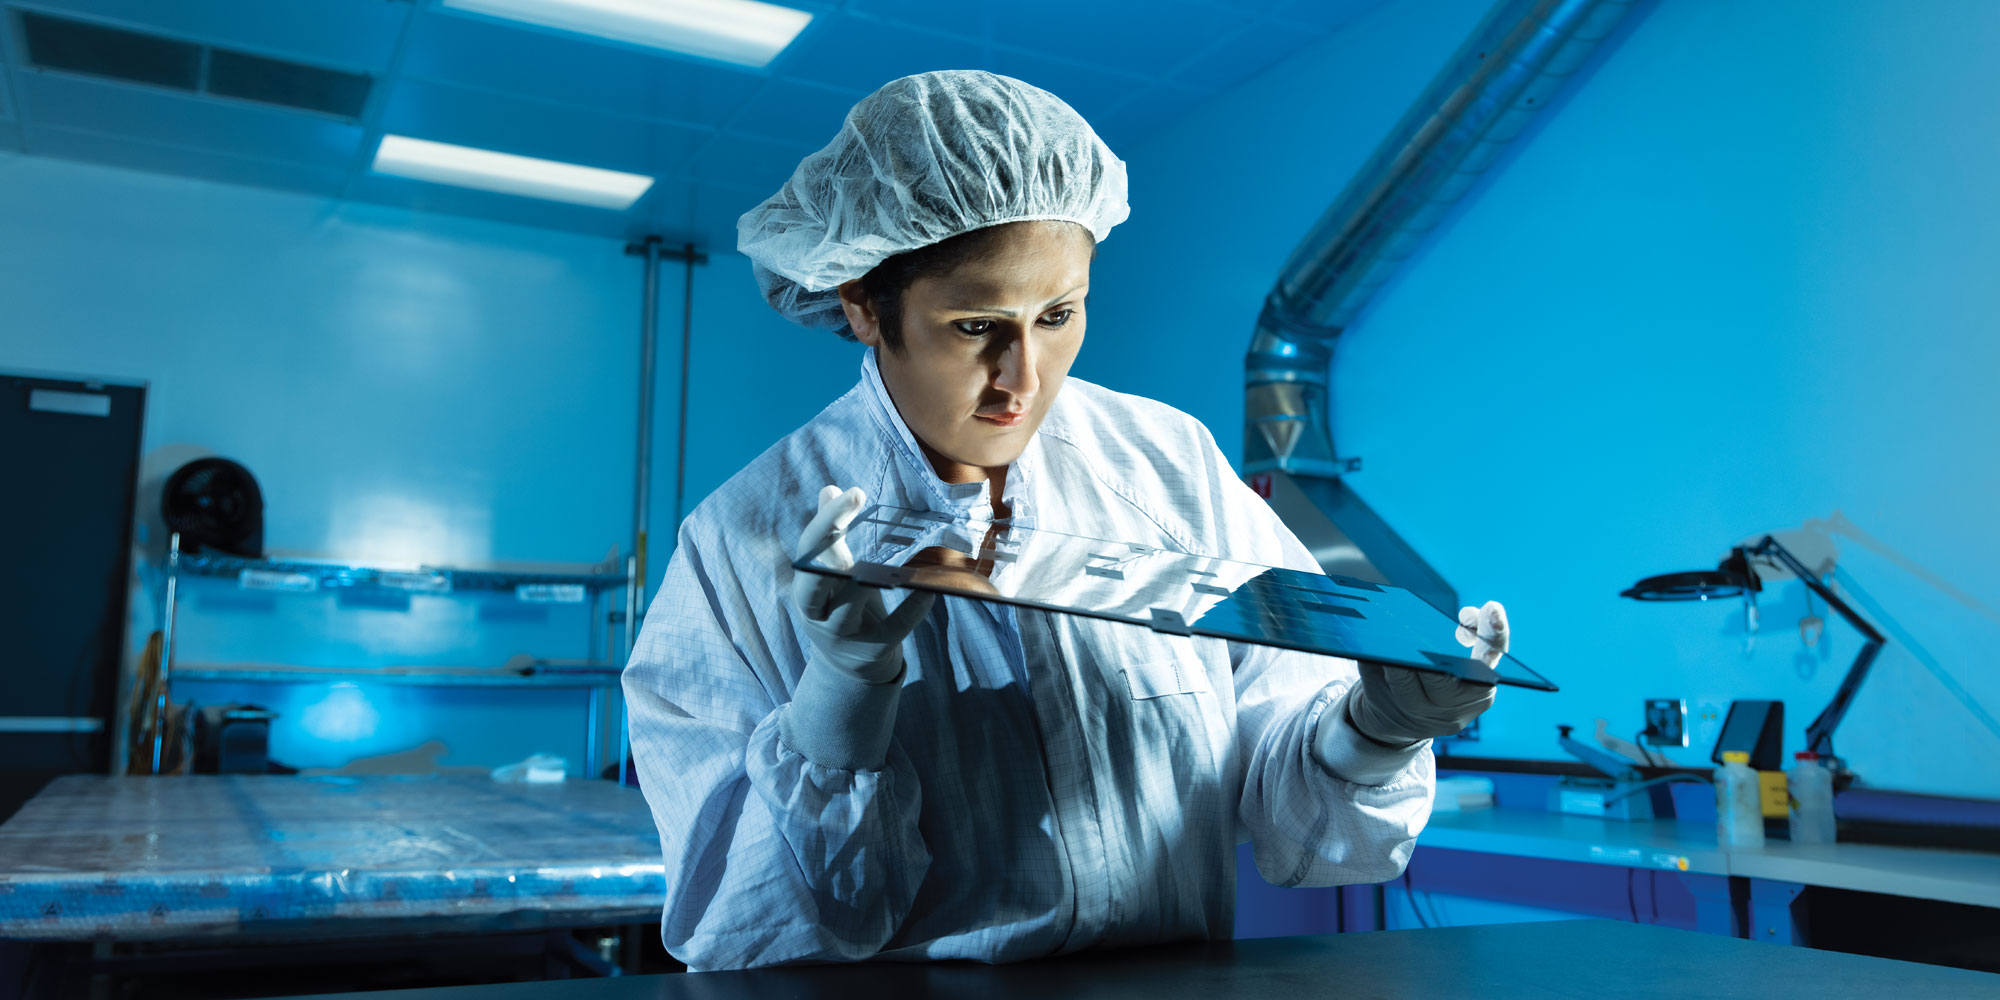 Rosibel Diaz wears a white coat, gloves and hairnet and stands at a table in a blue-lit lab, examining a mirrored panel in her hands.